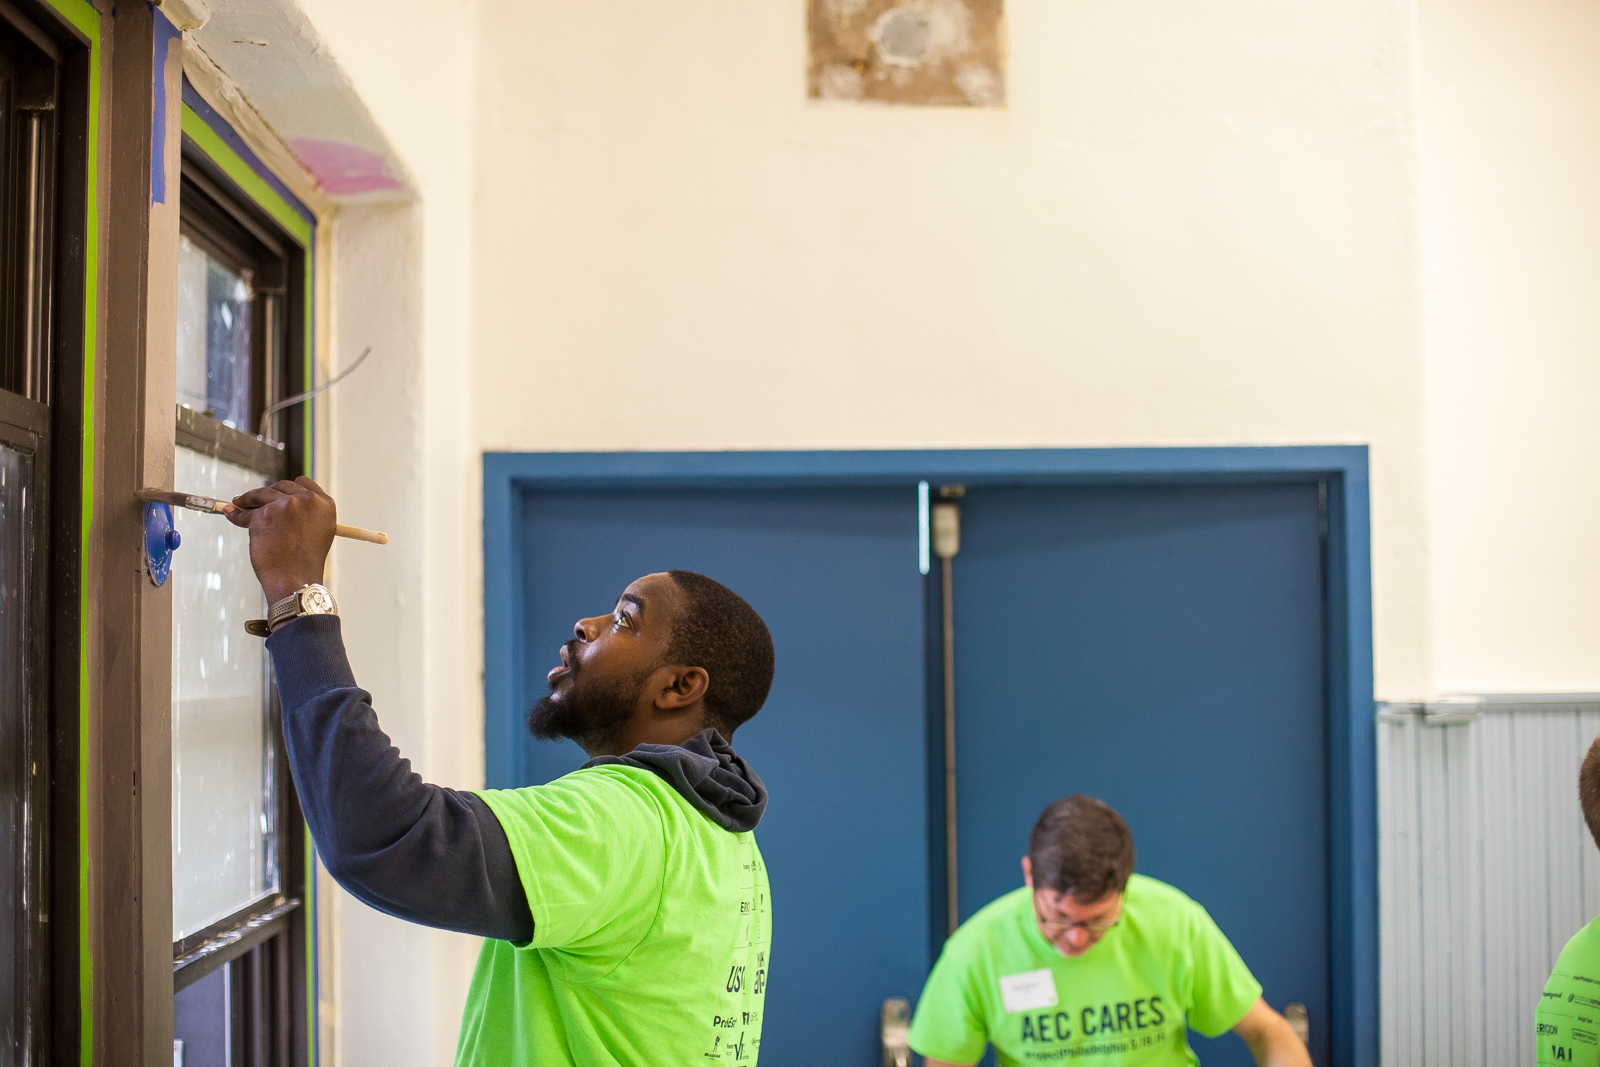 Andre Wright paints puts a new coat of paint on a window frame in the Sharswood Athletic Rec Center. (Brad Larrison for NewsWorks)